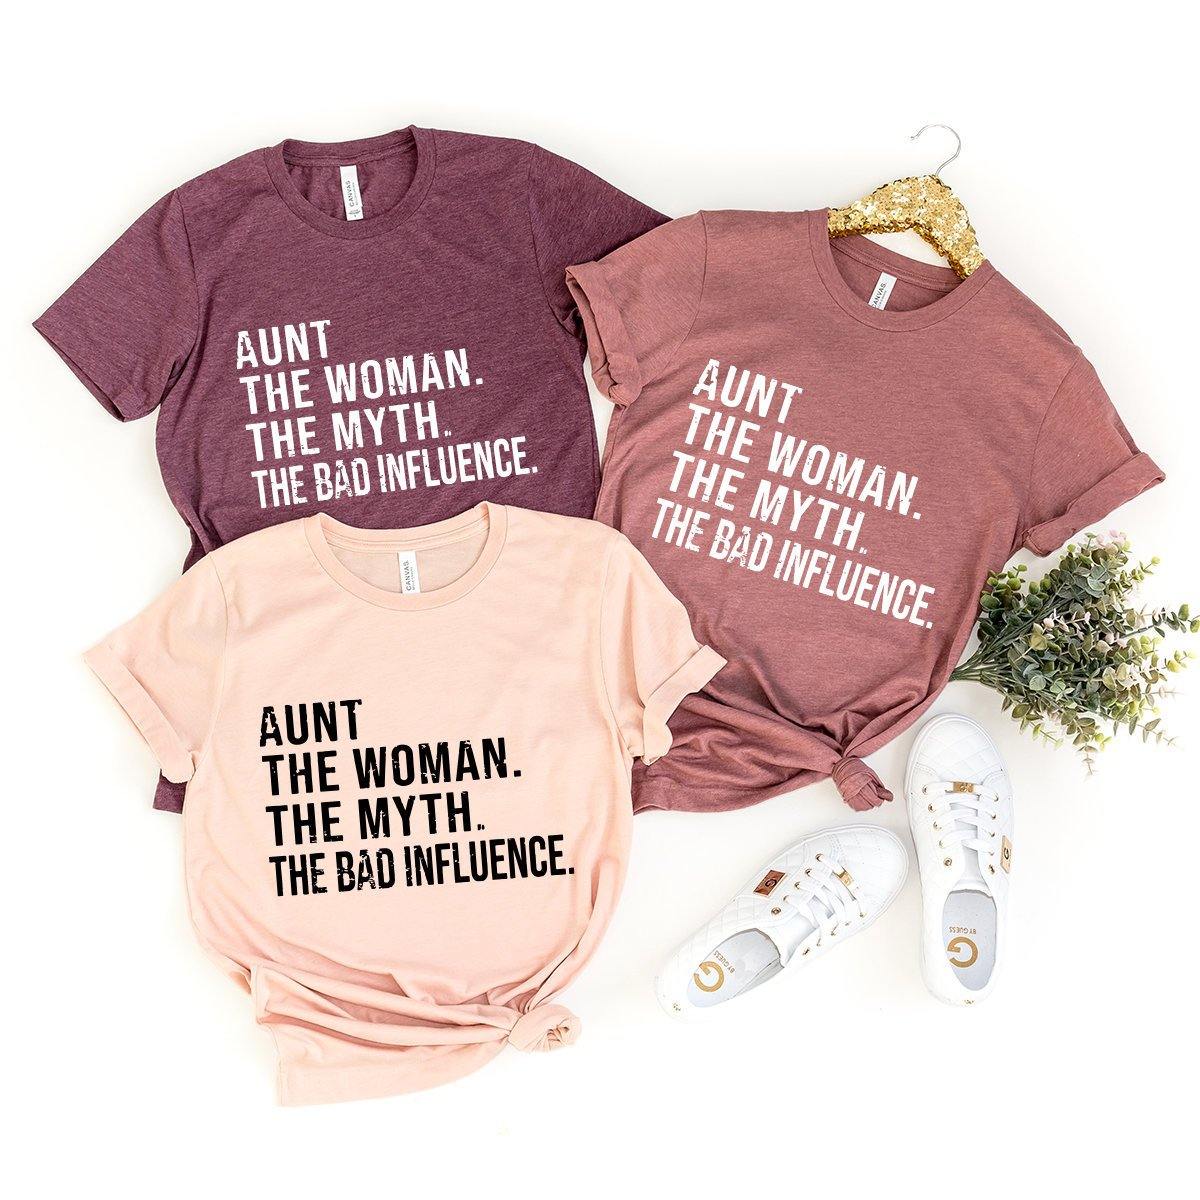 Funny Aunt T-Shirt, Aunt T shirt, Best Aunt Ever Tee, Auntie Tee, Aunt Gift, Gift For Aunt, Aunt The Women The Myth The Bad Influence Shirt - Fastdeliverytees.com